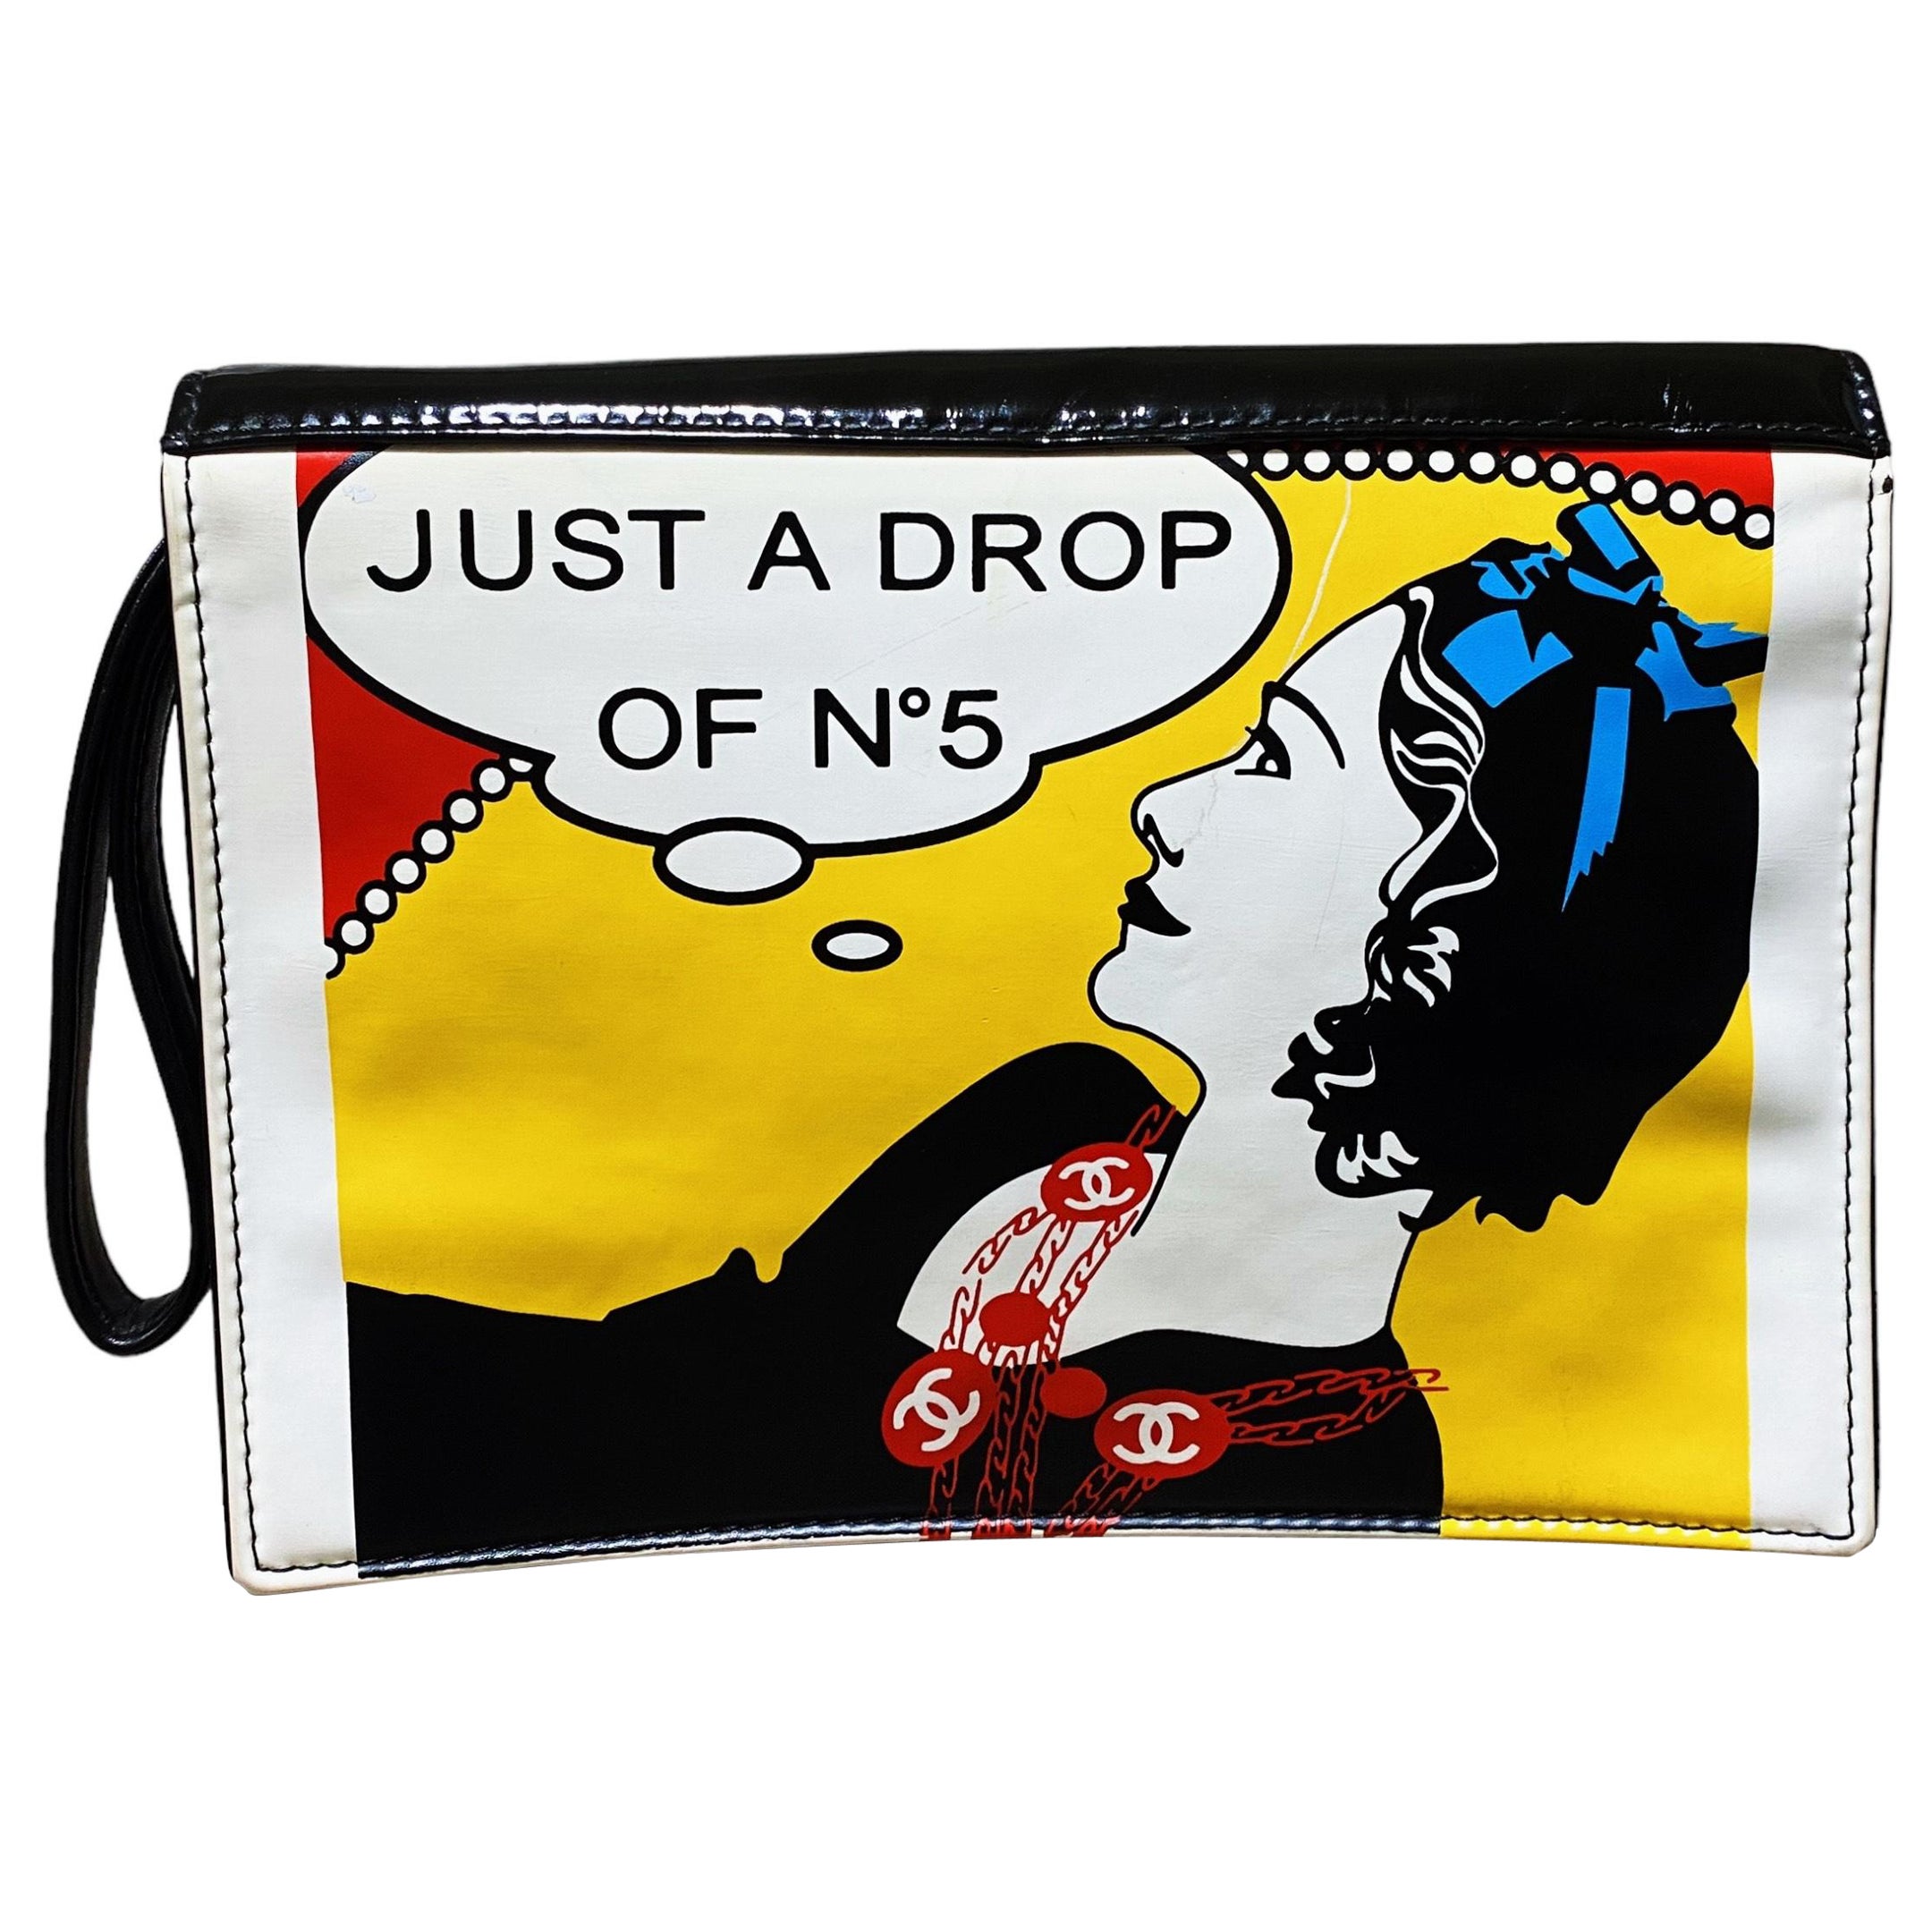 Vintage Rare 90's CHANEL Mademoiselle Comic Clutch - "JUST A DROP OF NO. 5" For Sale